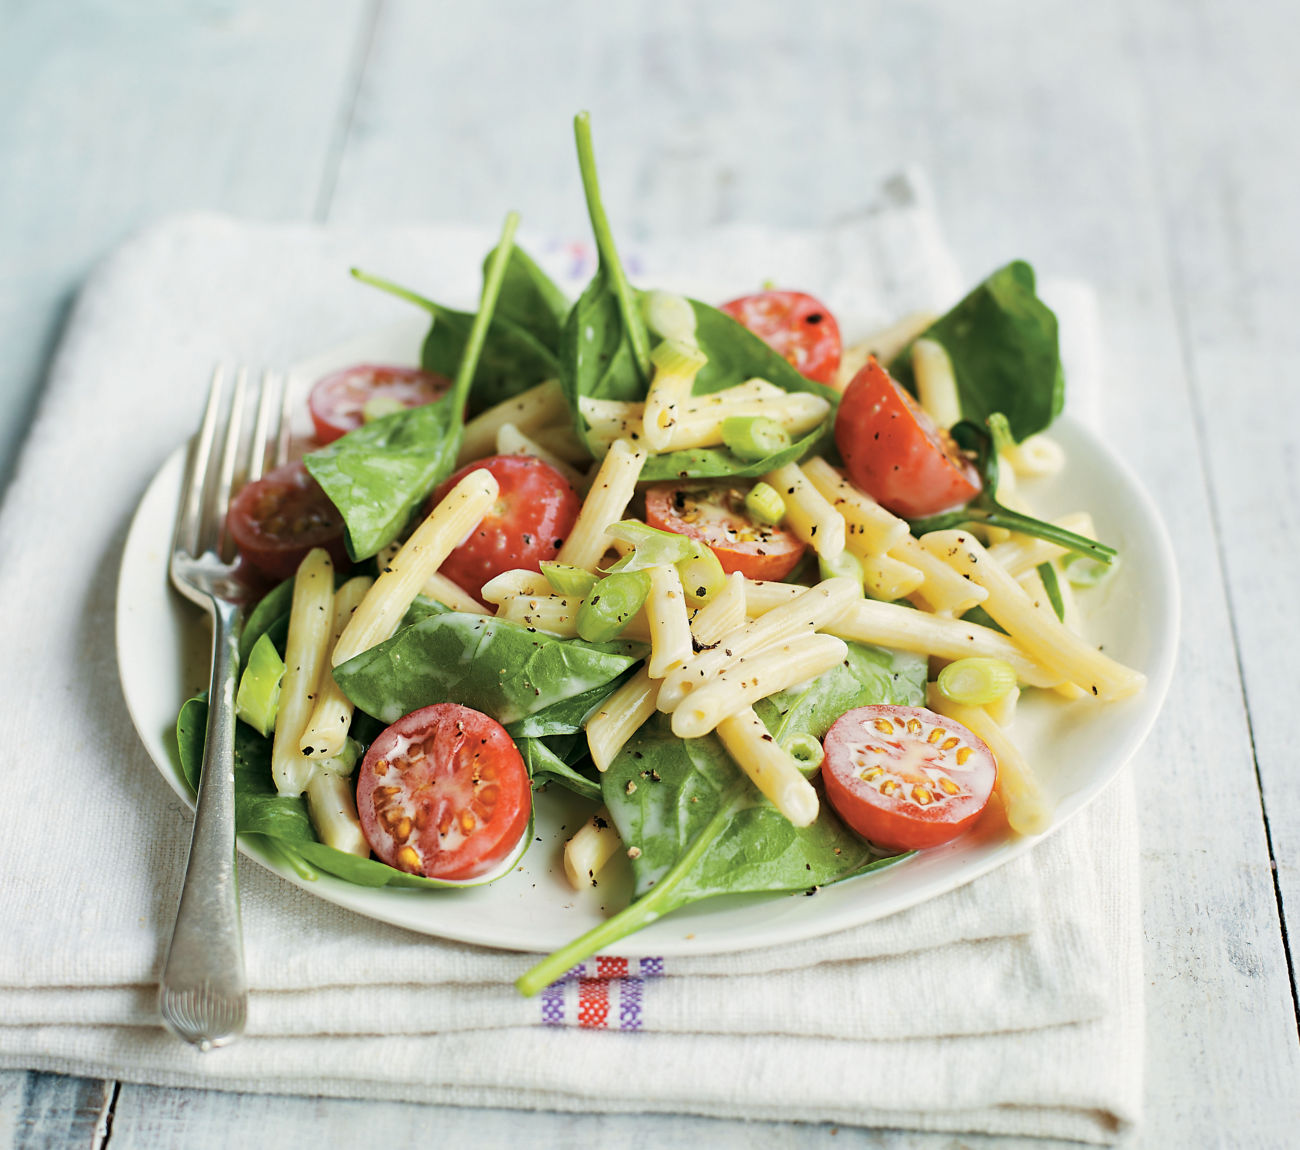 Spinach, Cherry Tomato & Blue Cheese Pasta Salad Recipe | Woolworths